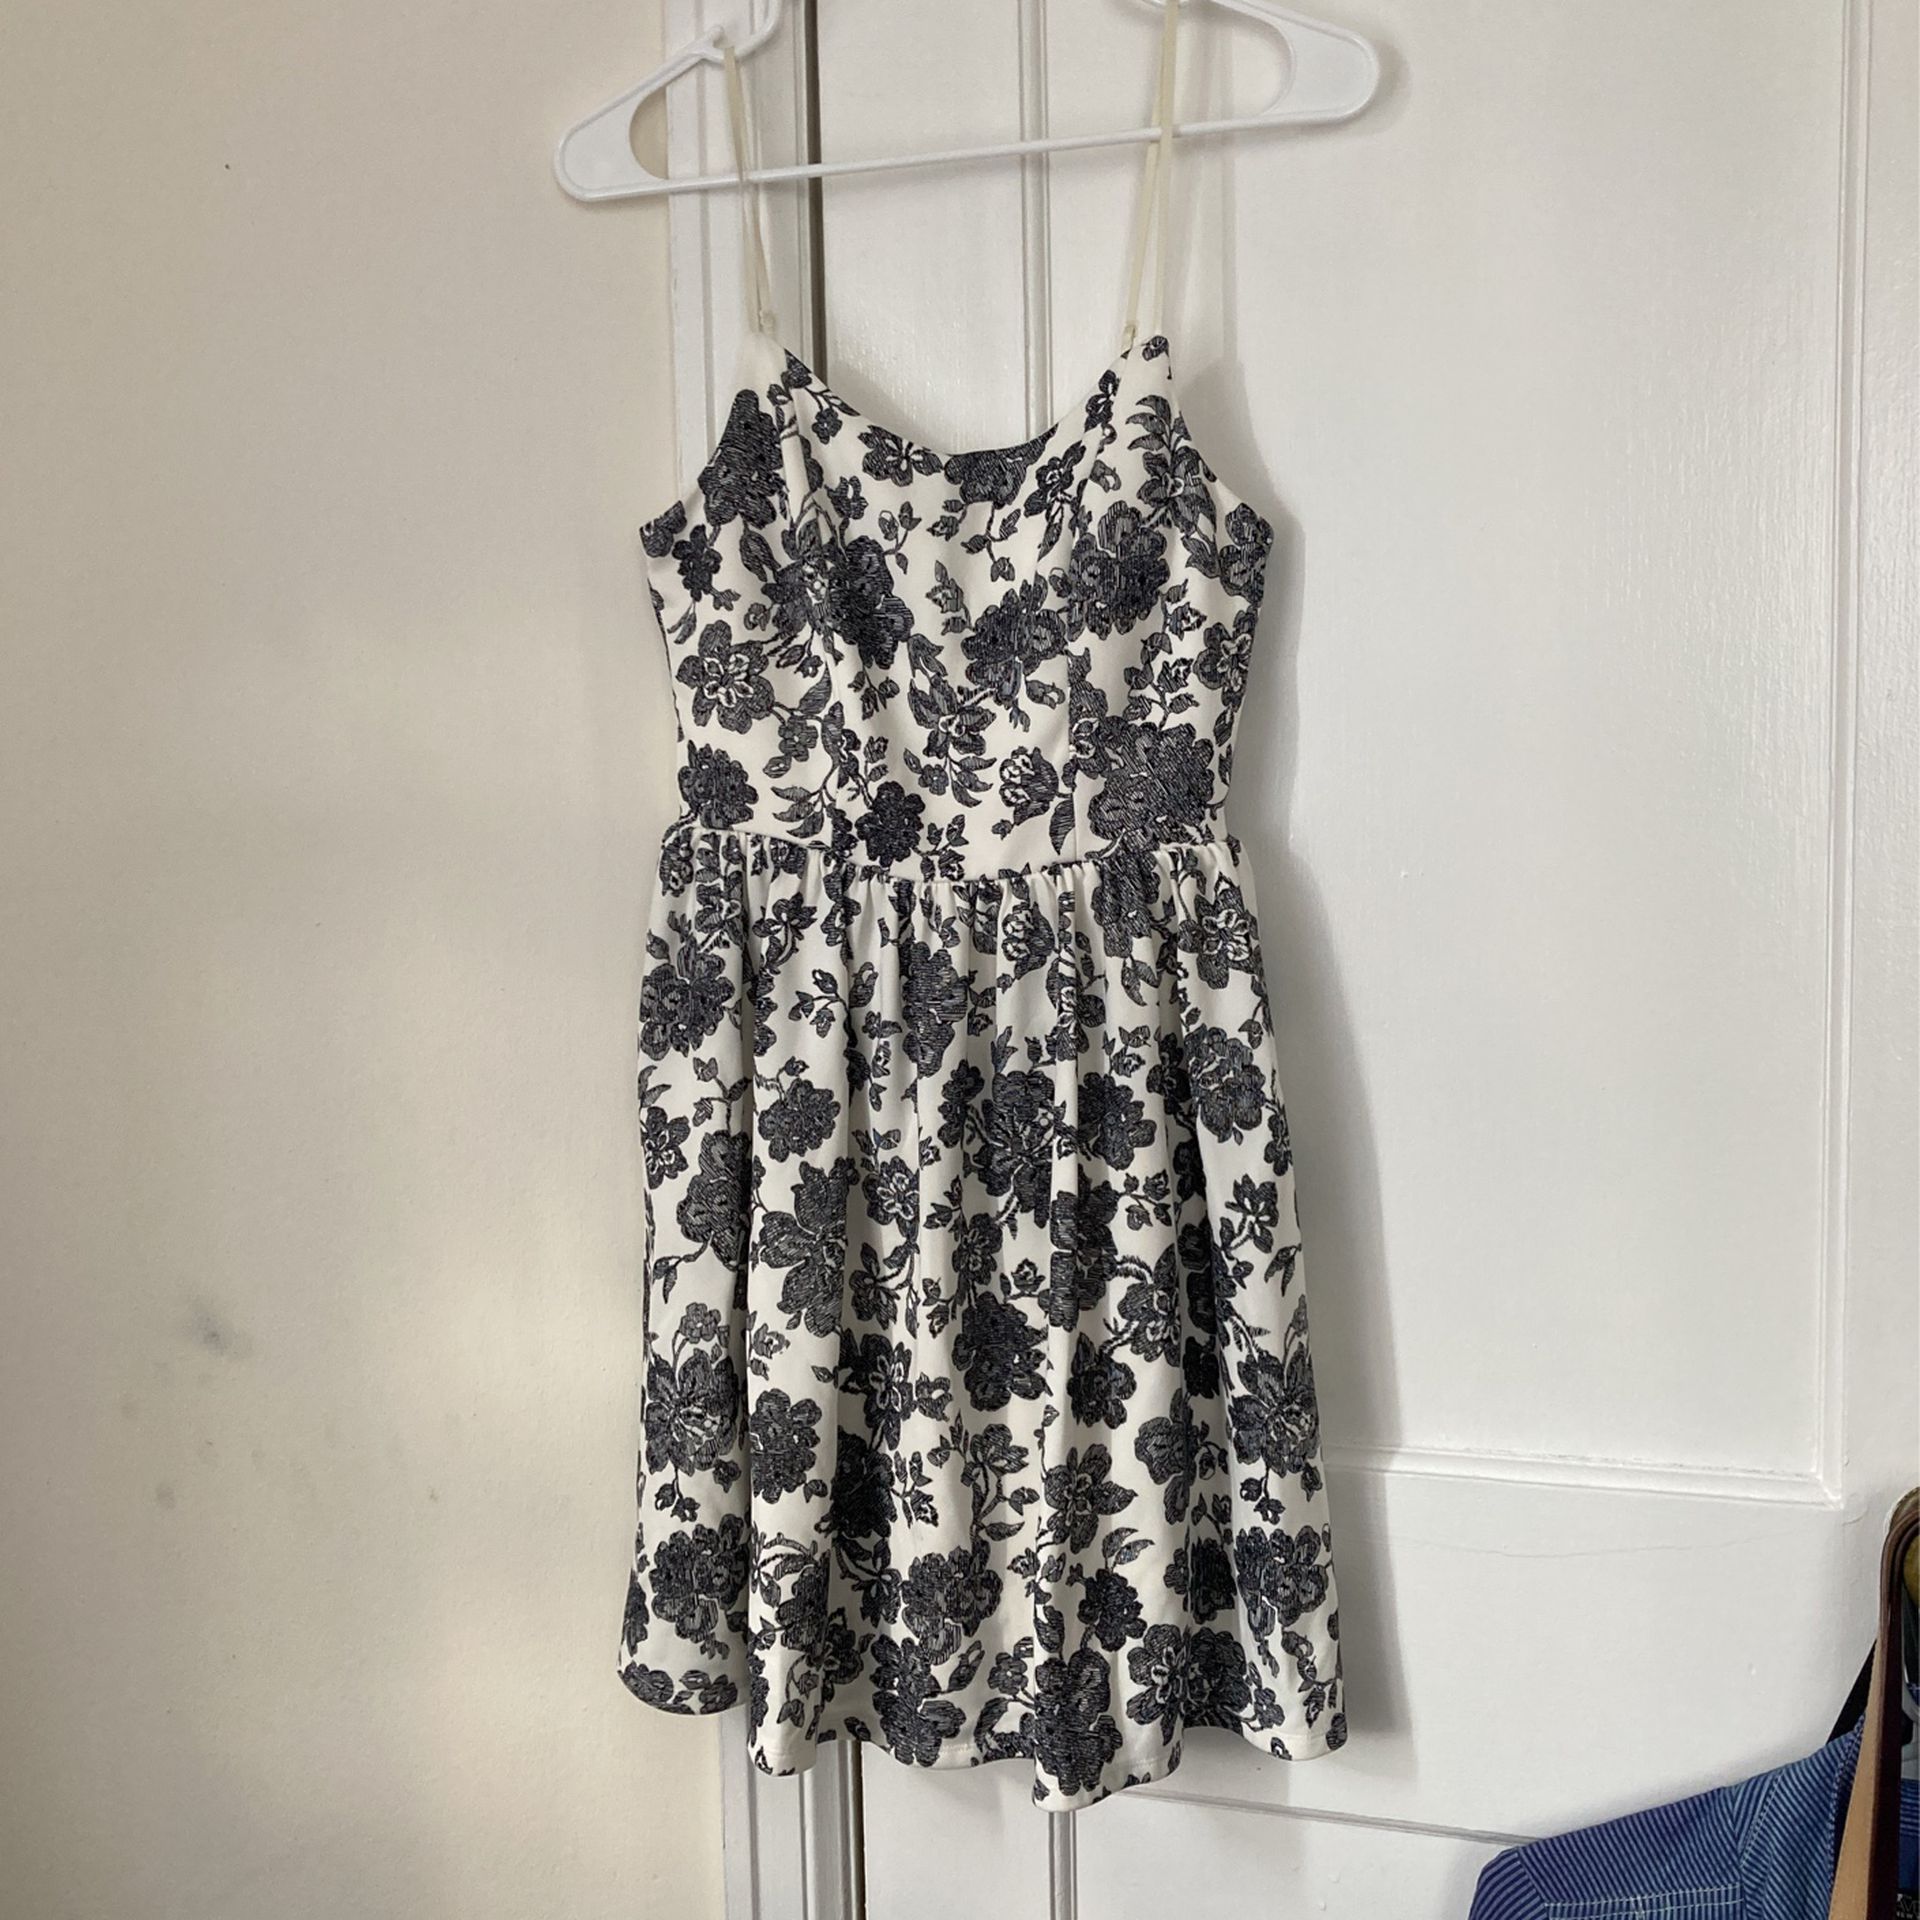 Black and white floral print dress